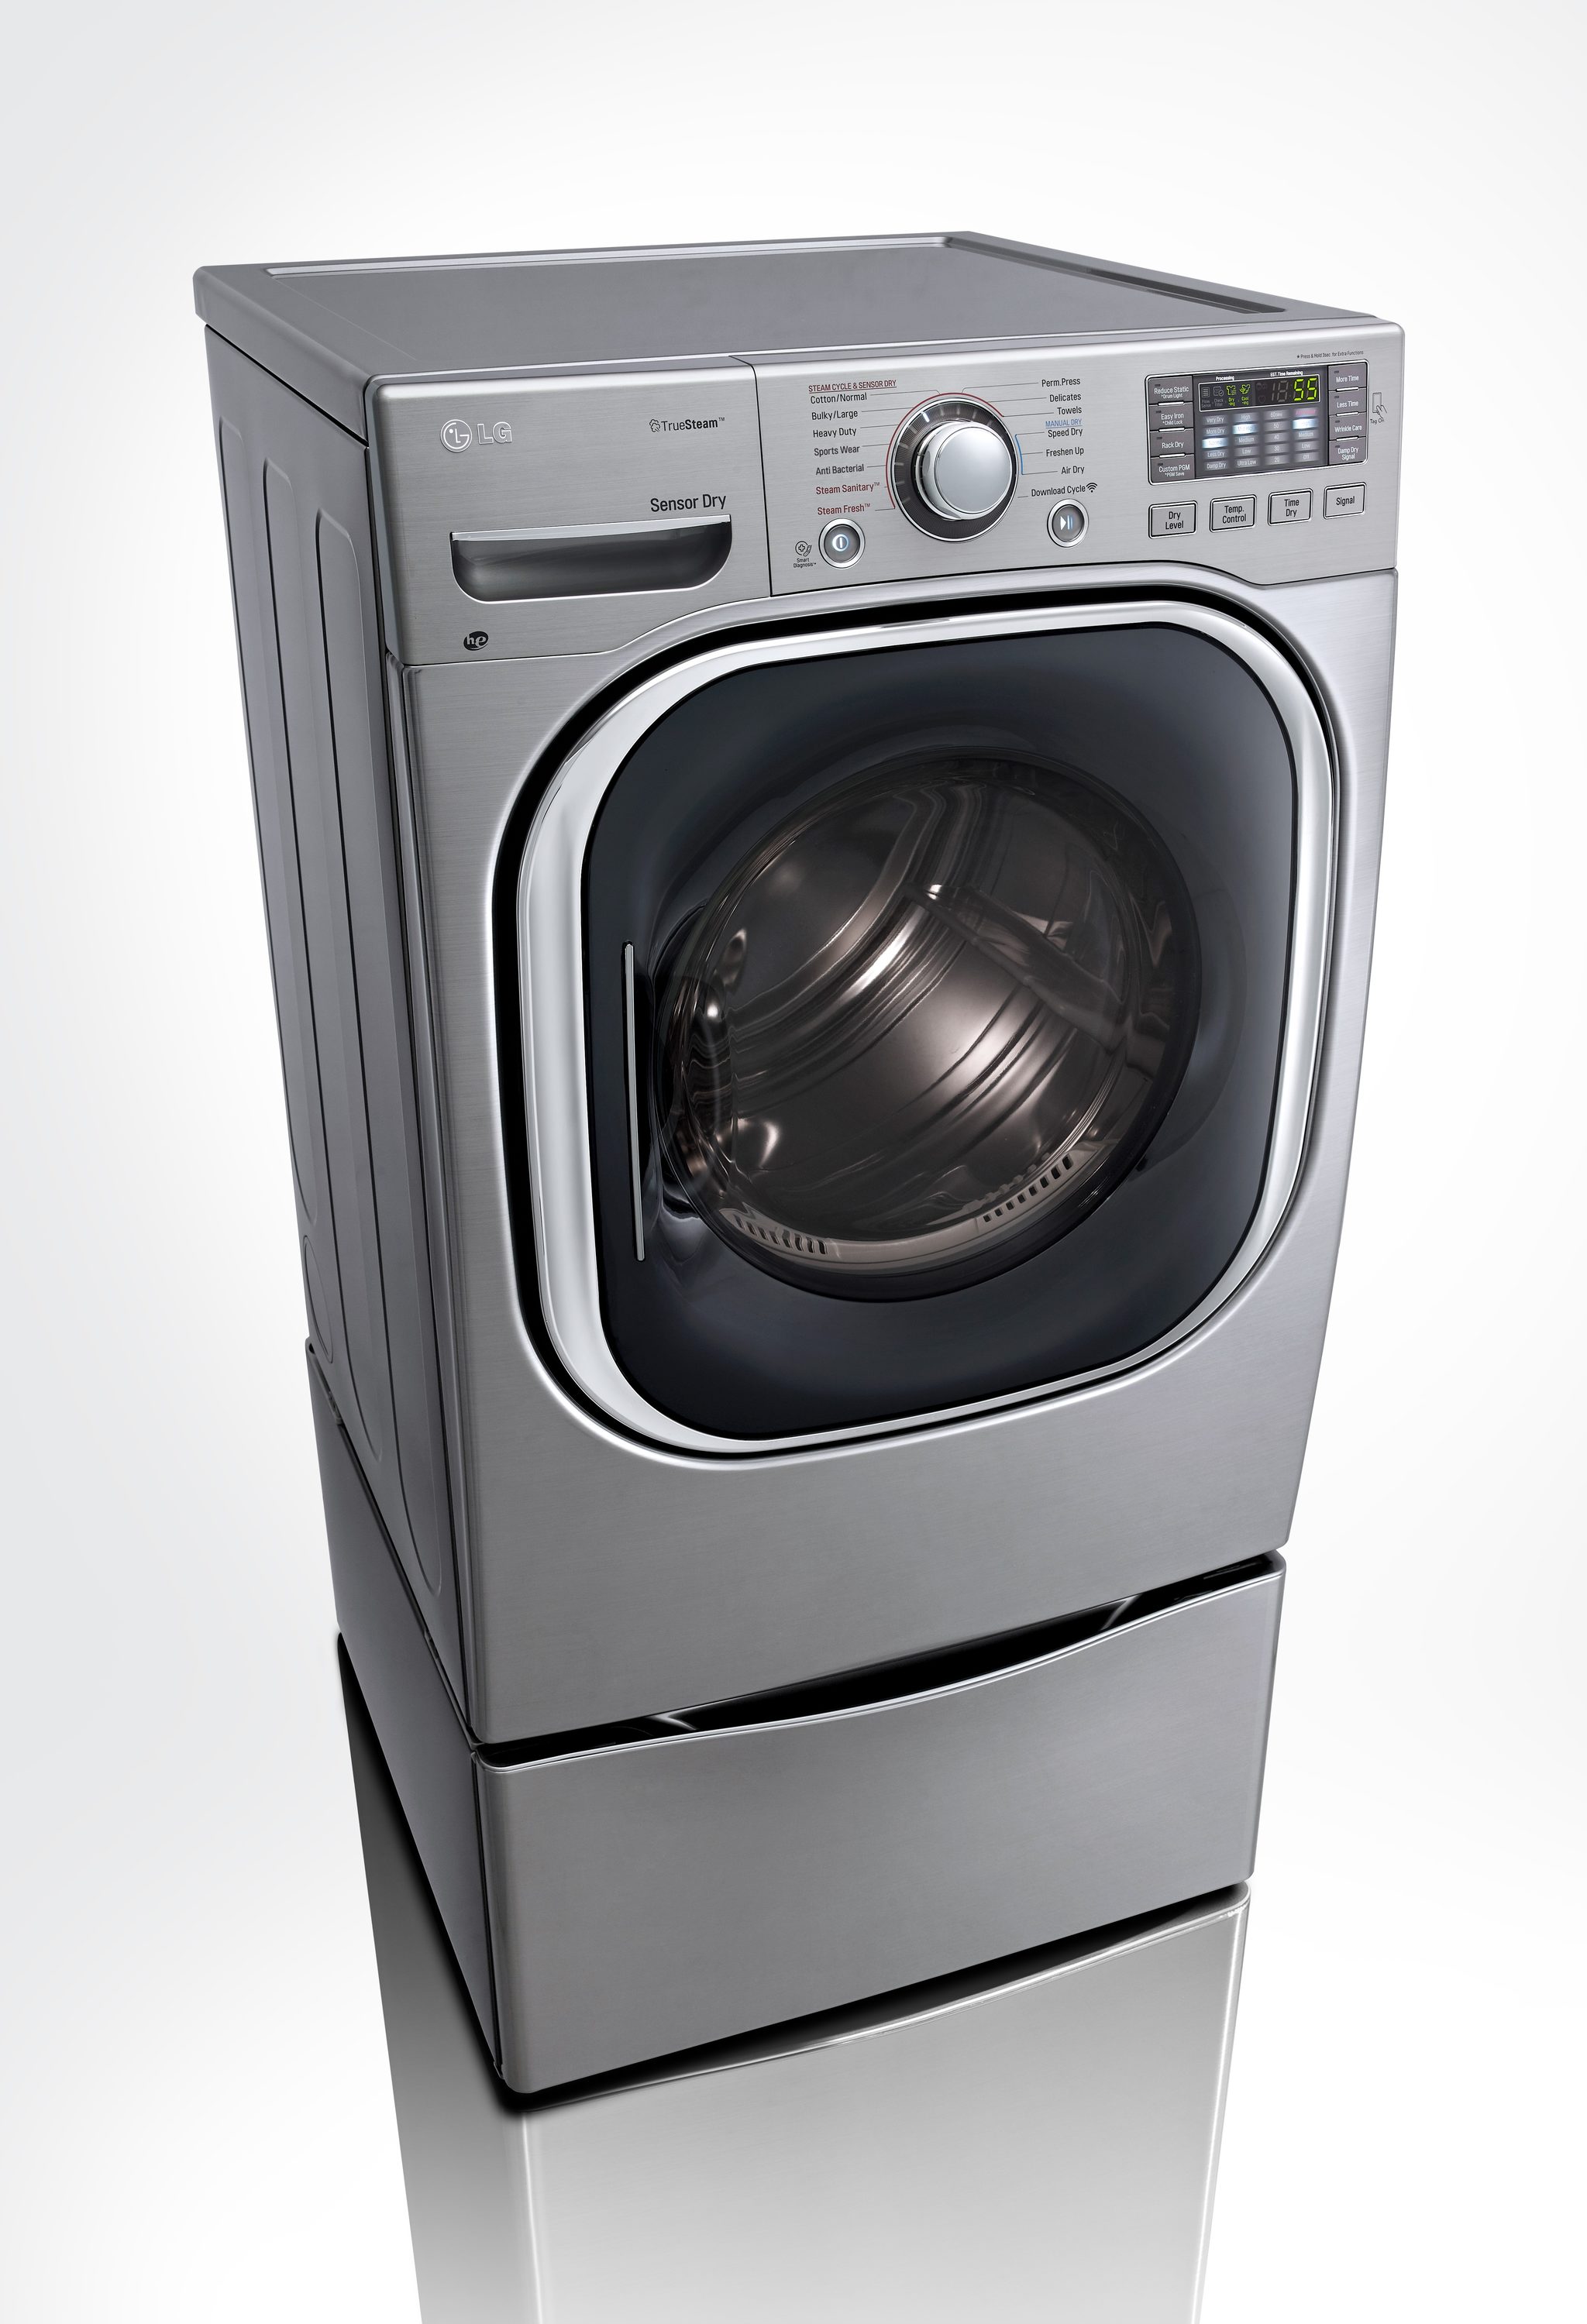 LG 7.4-cu ft Stackable Steam Cycle Electric Dryer (Graphite Steel